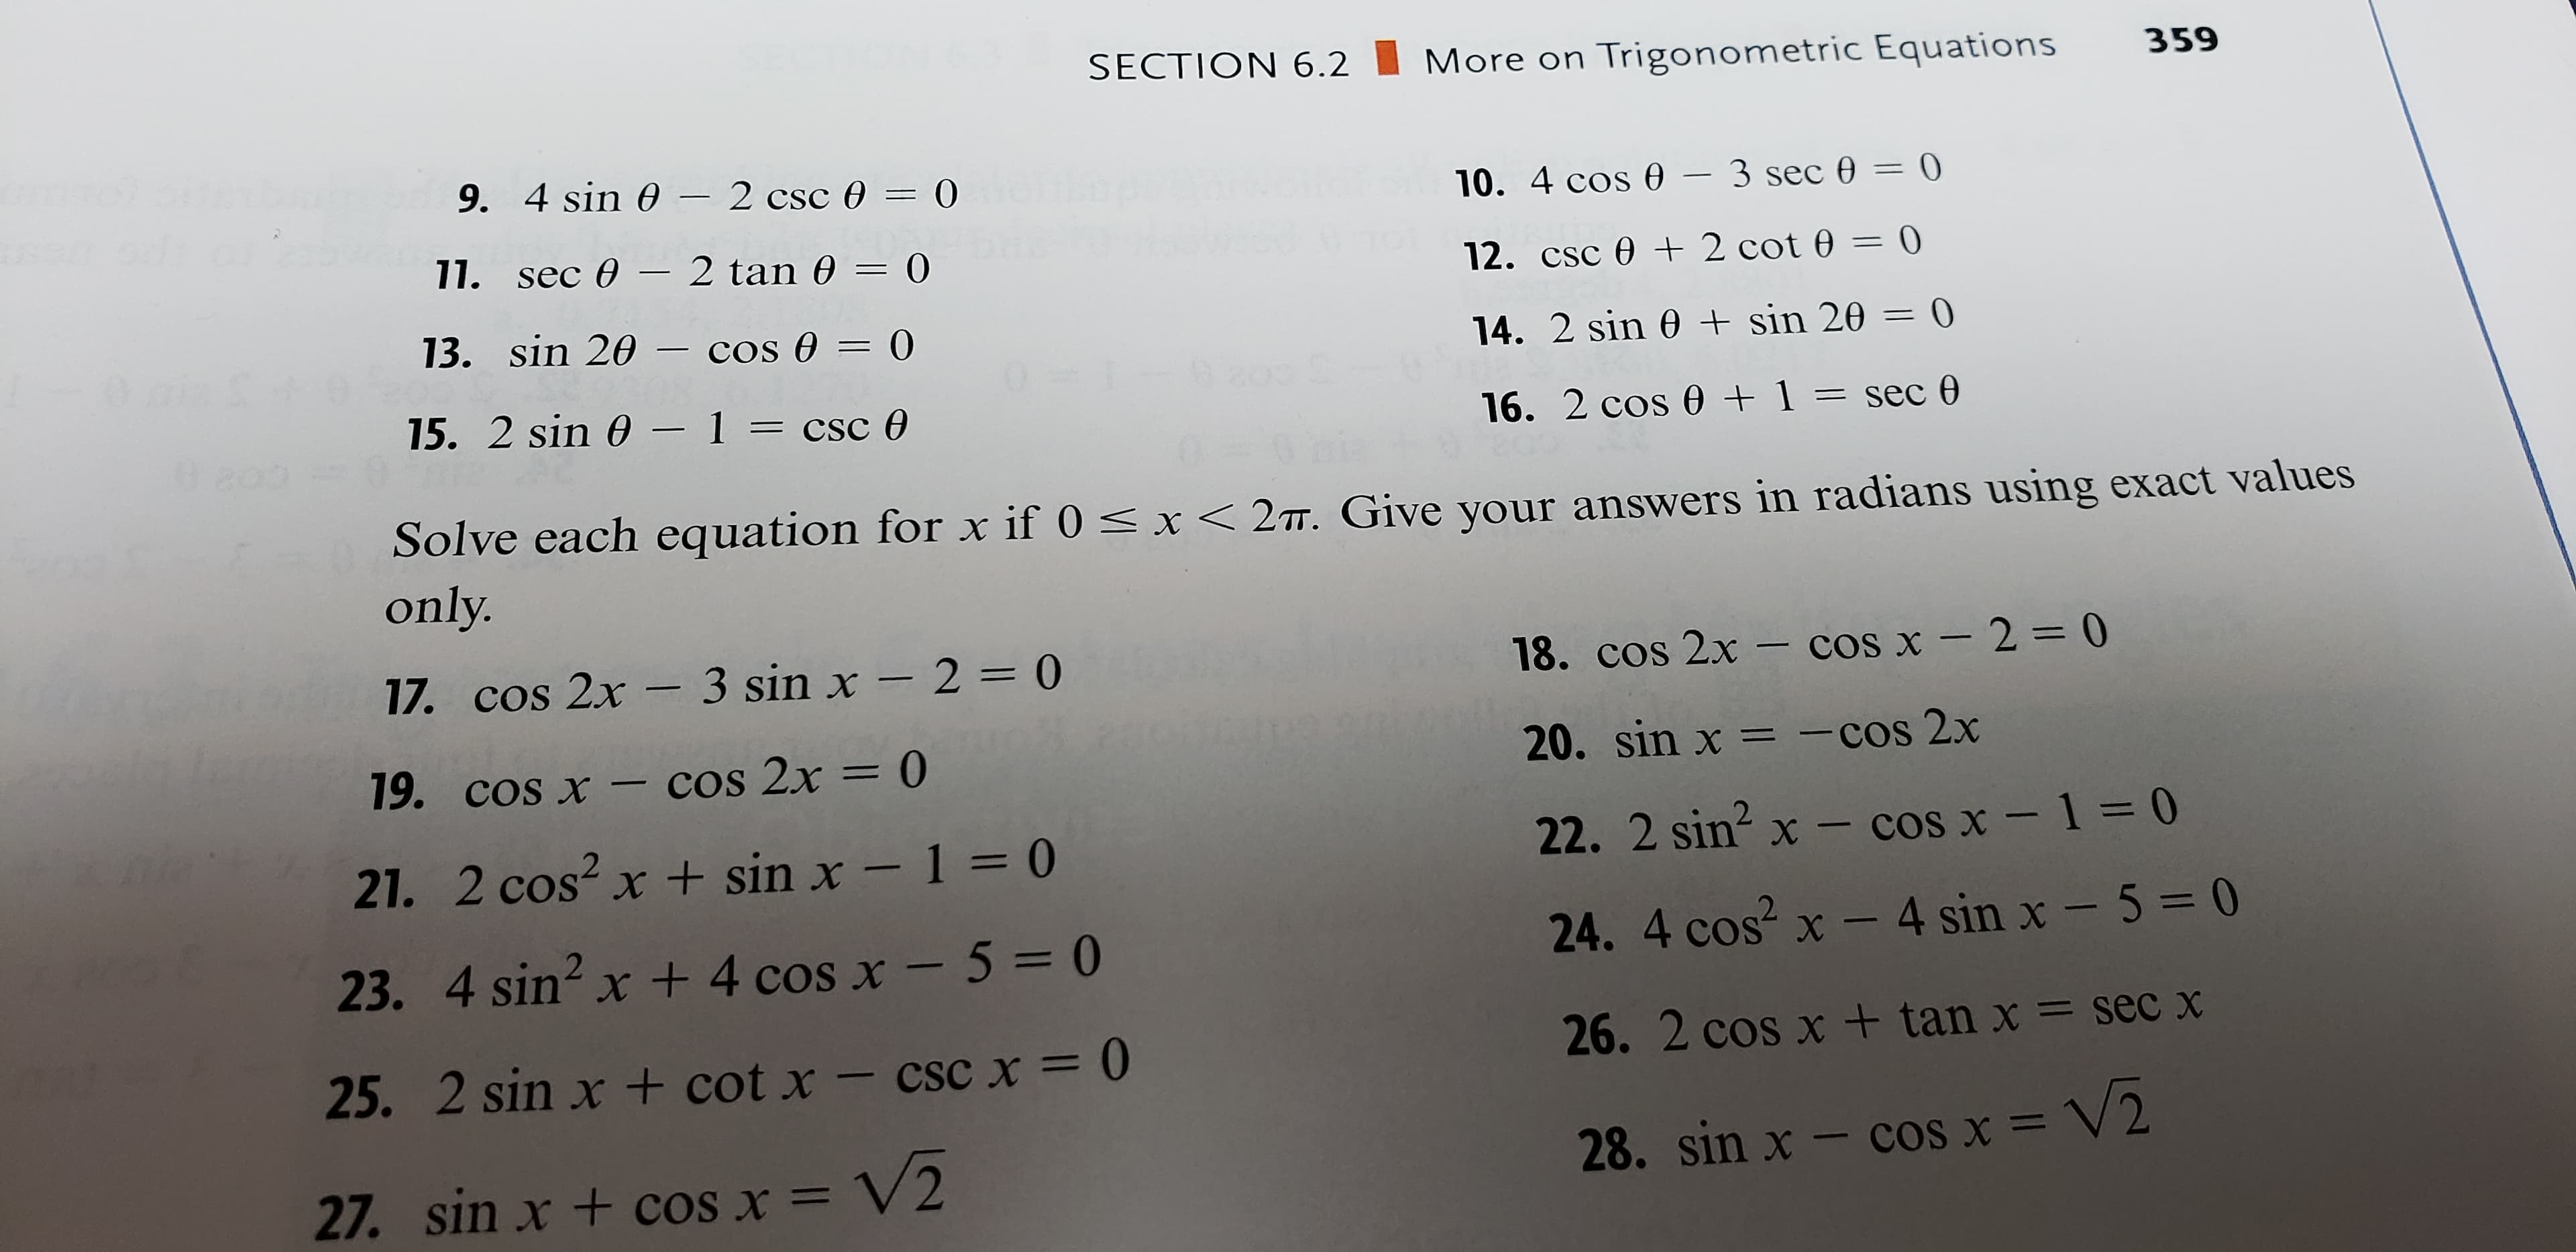 SECTION 6.2
More on Trigonometric Equations
359
9. 4 sin 0-2 csc 0 = 0
10. 4 cos 0 - 3 sec 0 = 0
11. sec 0
2 tan 0 = 0
12. csc 02 cot 0 = 0
13. sin 20 - cos 0 = 0
sin 20 = 0
14. 2 sin 0
0.i & 19
6ao E
15. 2 sin 0 1 = csc 0
1 = sec 0
16. 2 cos 0
Solve each equation for x if 0
only.
x< 2TT. Give your answers in radians using exact values
18. cos 2x - cos x 2-0
17. cos 2x -3 sin x - 2 = 0
20. sin x -cos 2x
= 0
cos x-cos 2x
19.
22. 2 sin2 x - cos x - 1 = 0
21. 2 cos2 x + sin x - 1 = 0
24. 4 cos2 x - 4 sin x - 5= 0
23. 4 sin2 x + 4 cos x - 5 = 0
26. 2 cos x + tan x
secx
25. 2 sin x + cot x - cscx = 0
28. sin x - cos x = V2
27. sin x + coS X =V2
